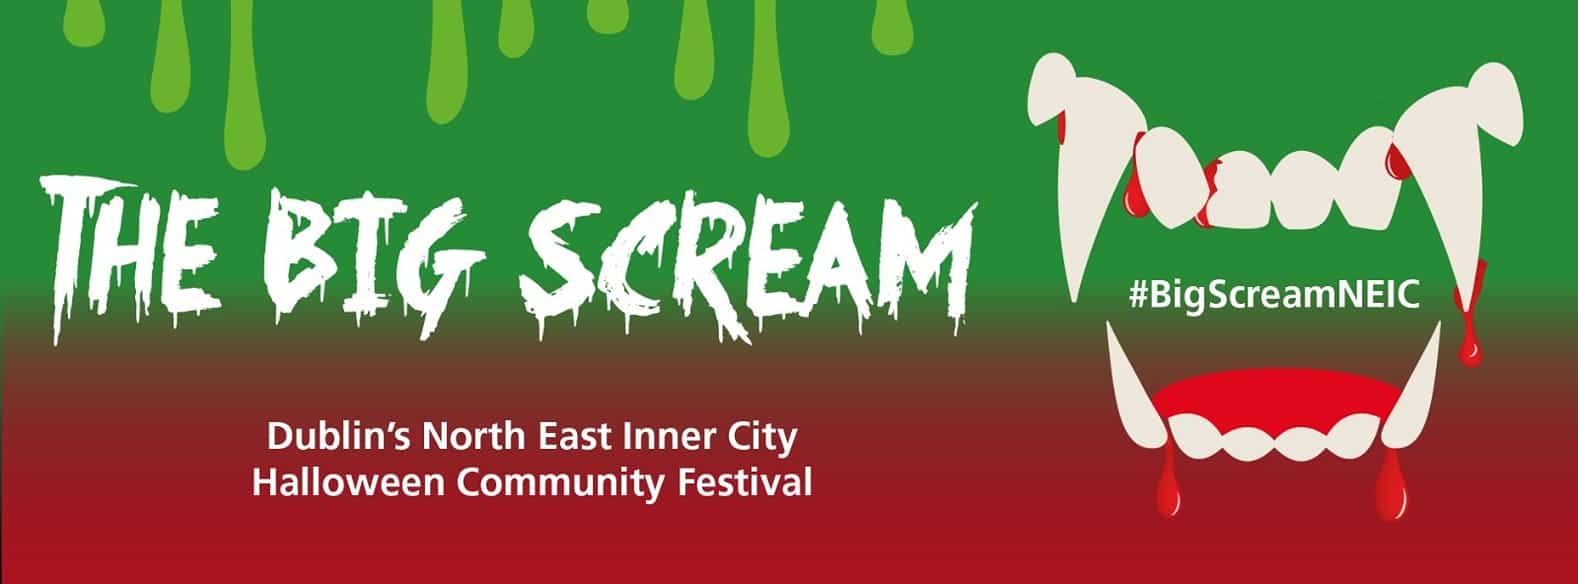 A green and red poster featuring vampire fangs for The Big Scream in Dublin.